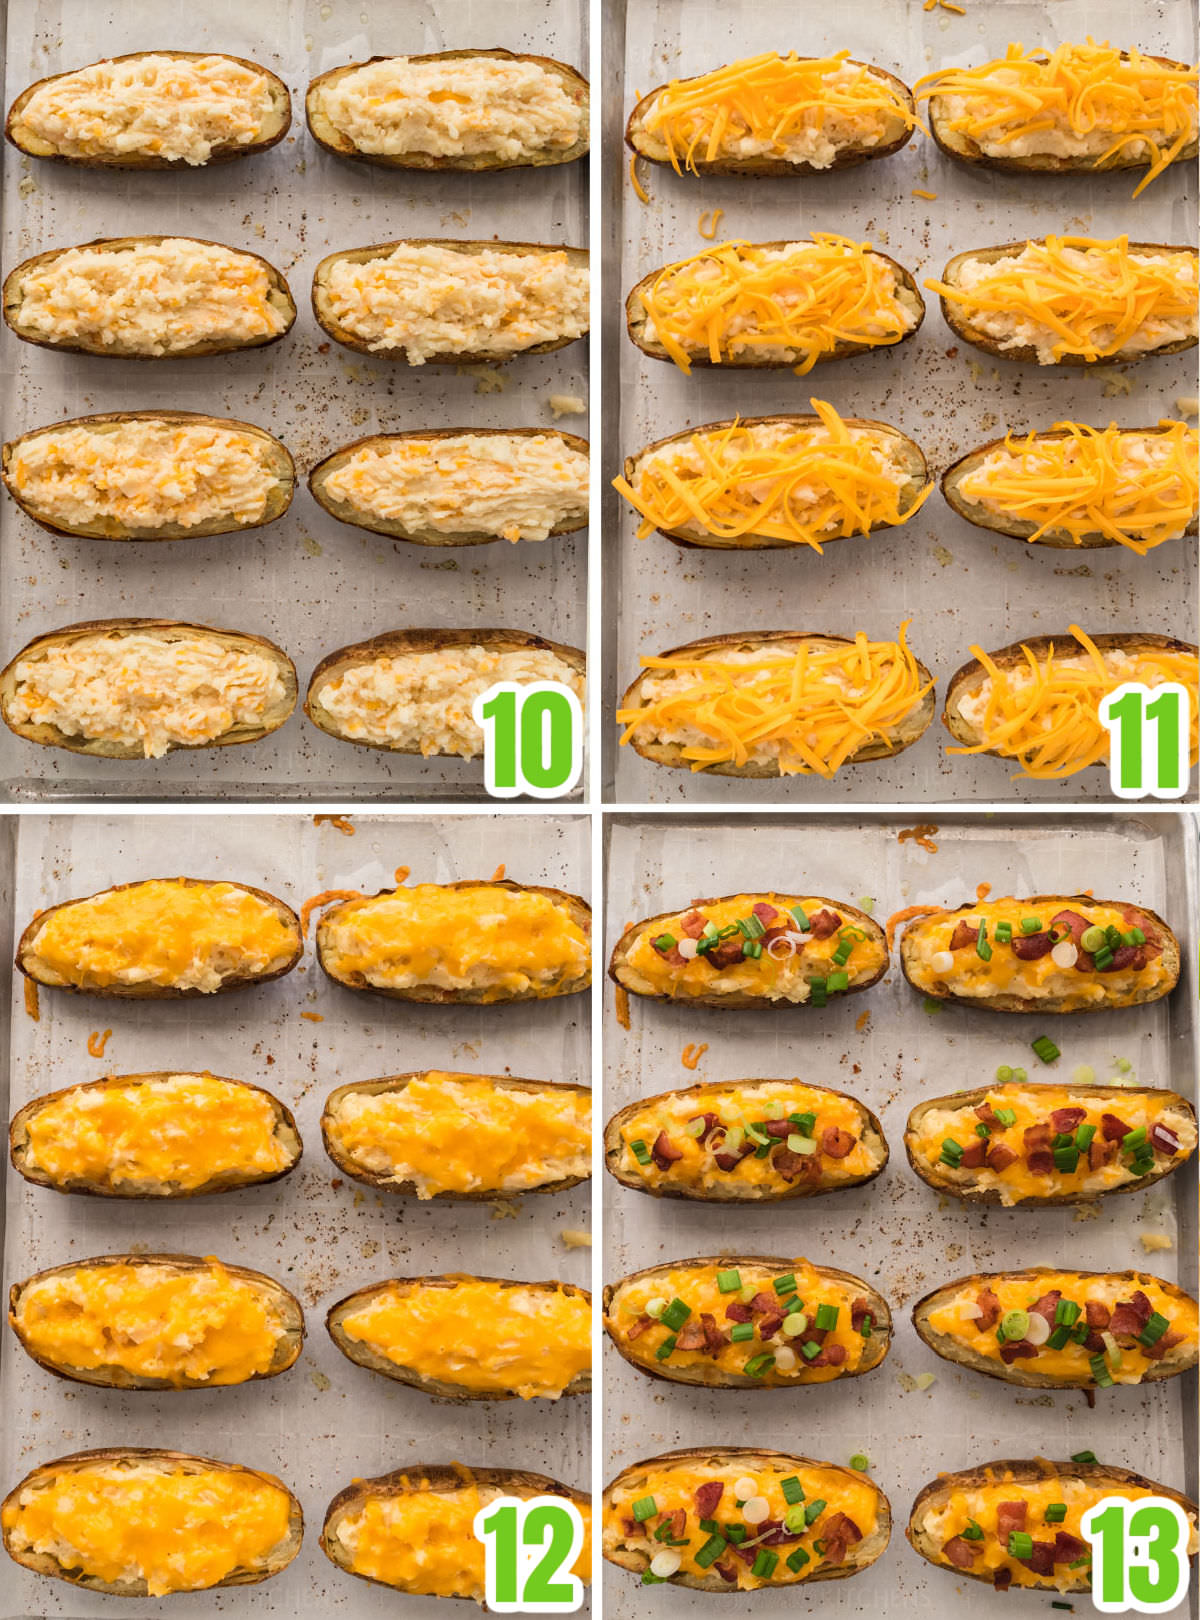 Collage image showing the steps for assembling the Twice Baked Potatoes and reheating them in the oven.